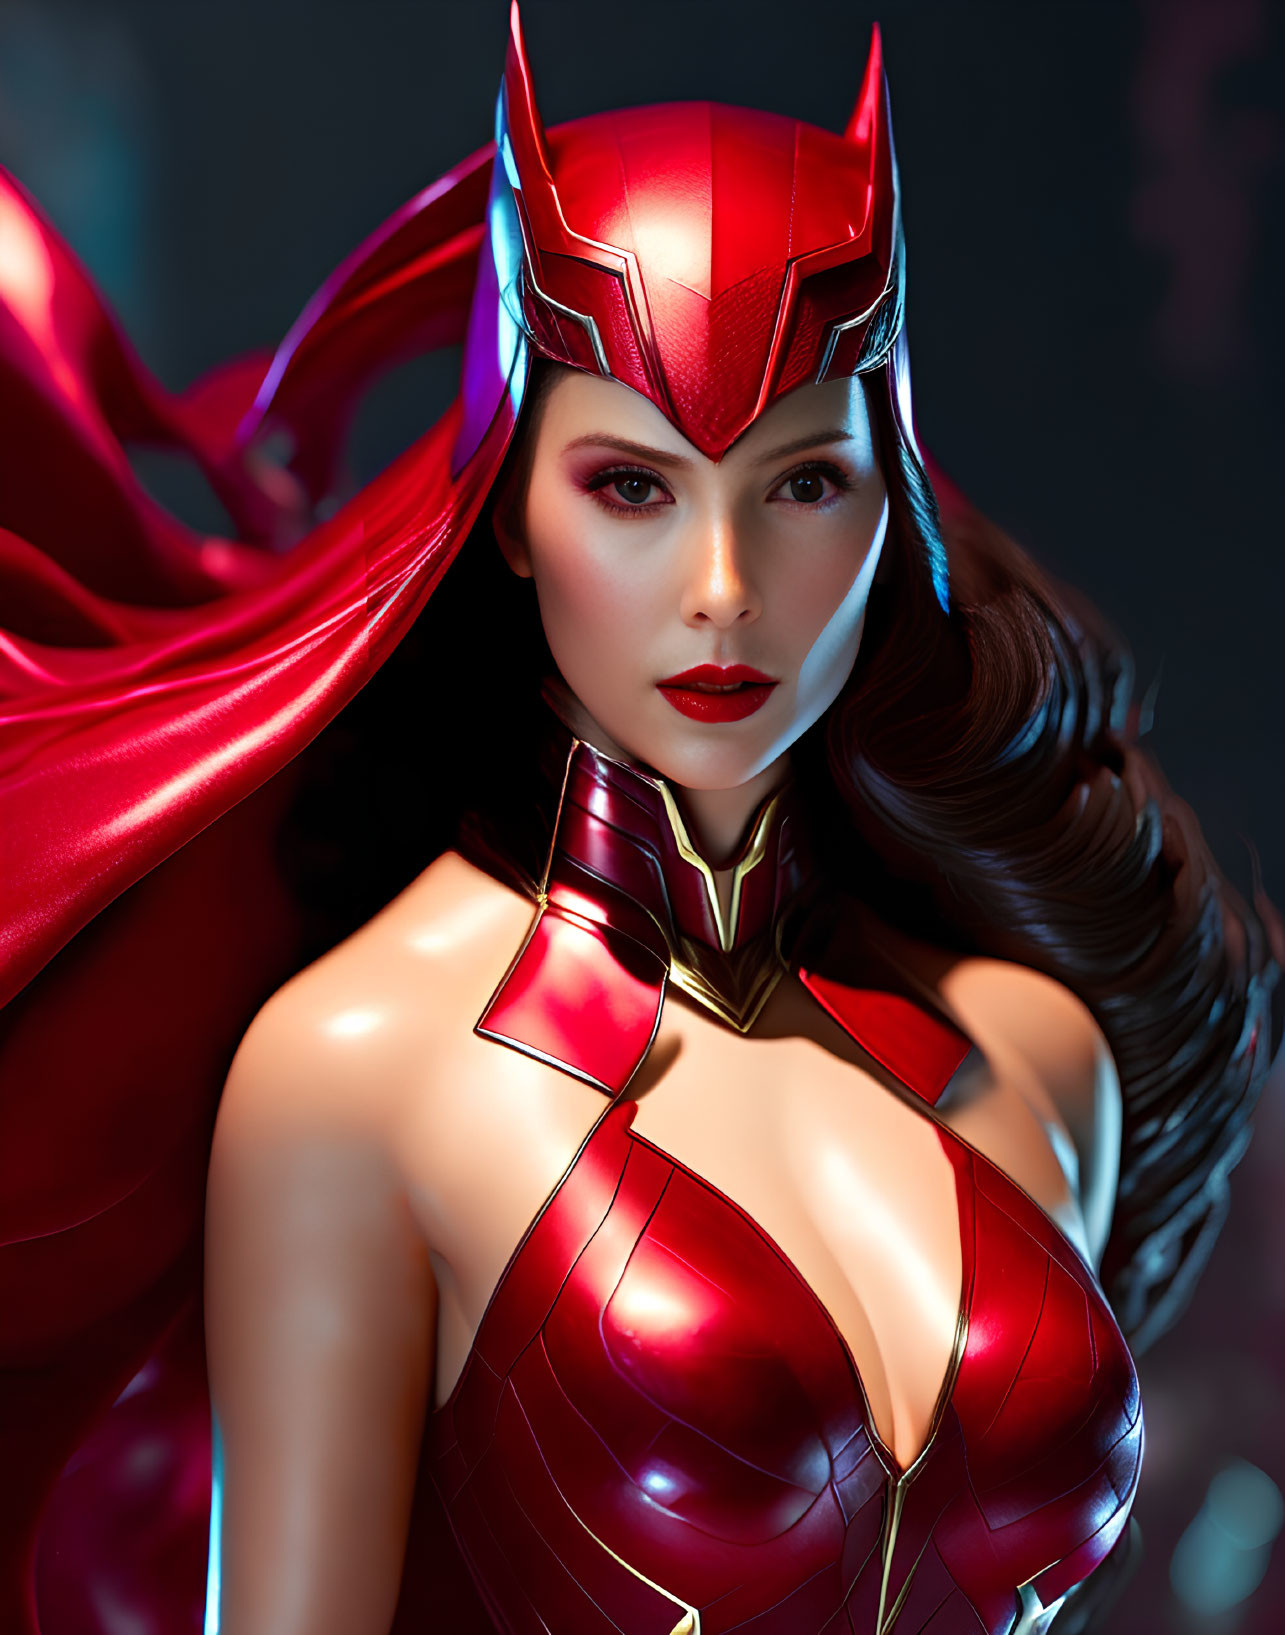 Female superhero in red helmet and armor with white facial makeup and flowing cape on dark background